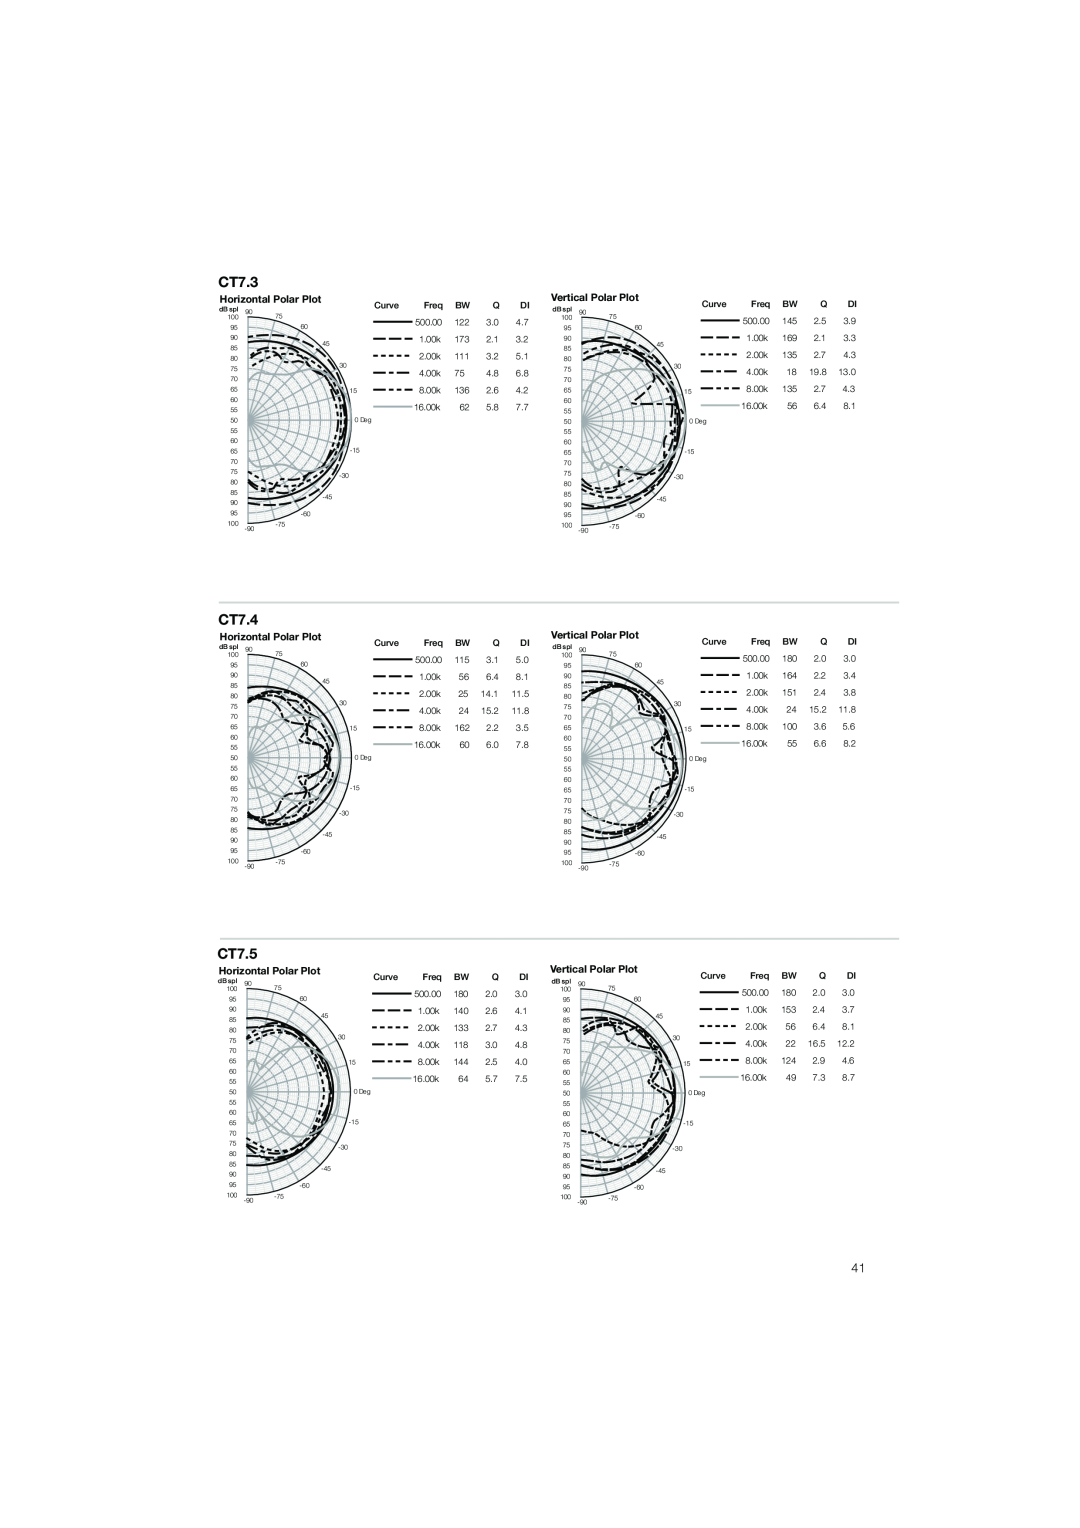 Bowers & Wilkins CT7.4 LCRS, CT7.5 LCRS, CT7.3 LCRS installation manual Horizontal Polar Plot, Vertical Polar Plot 